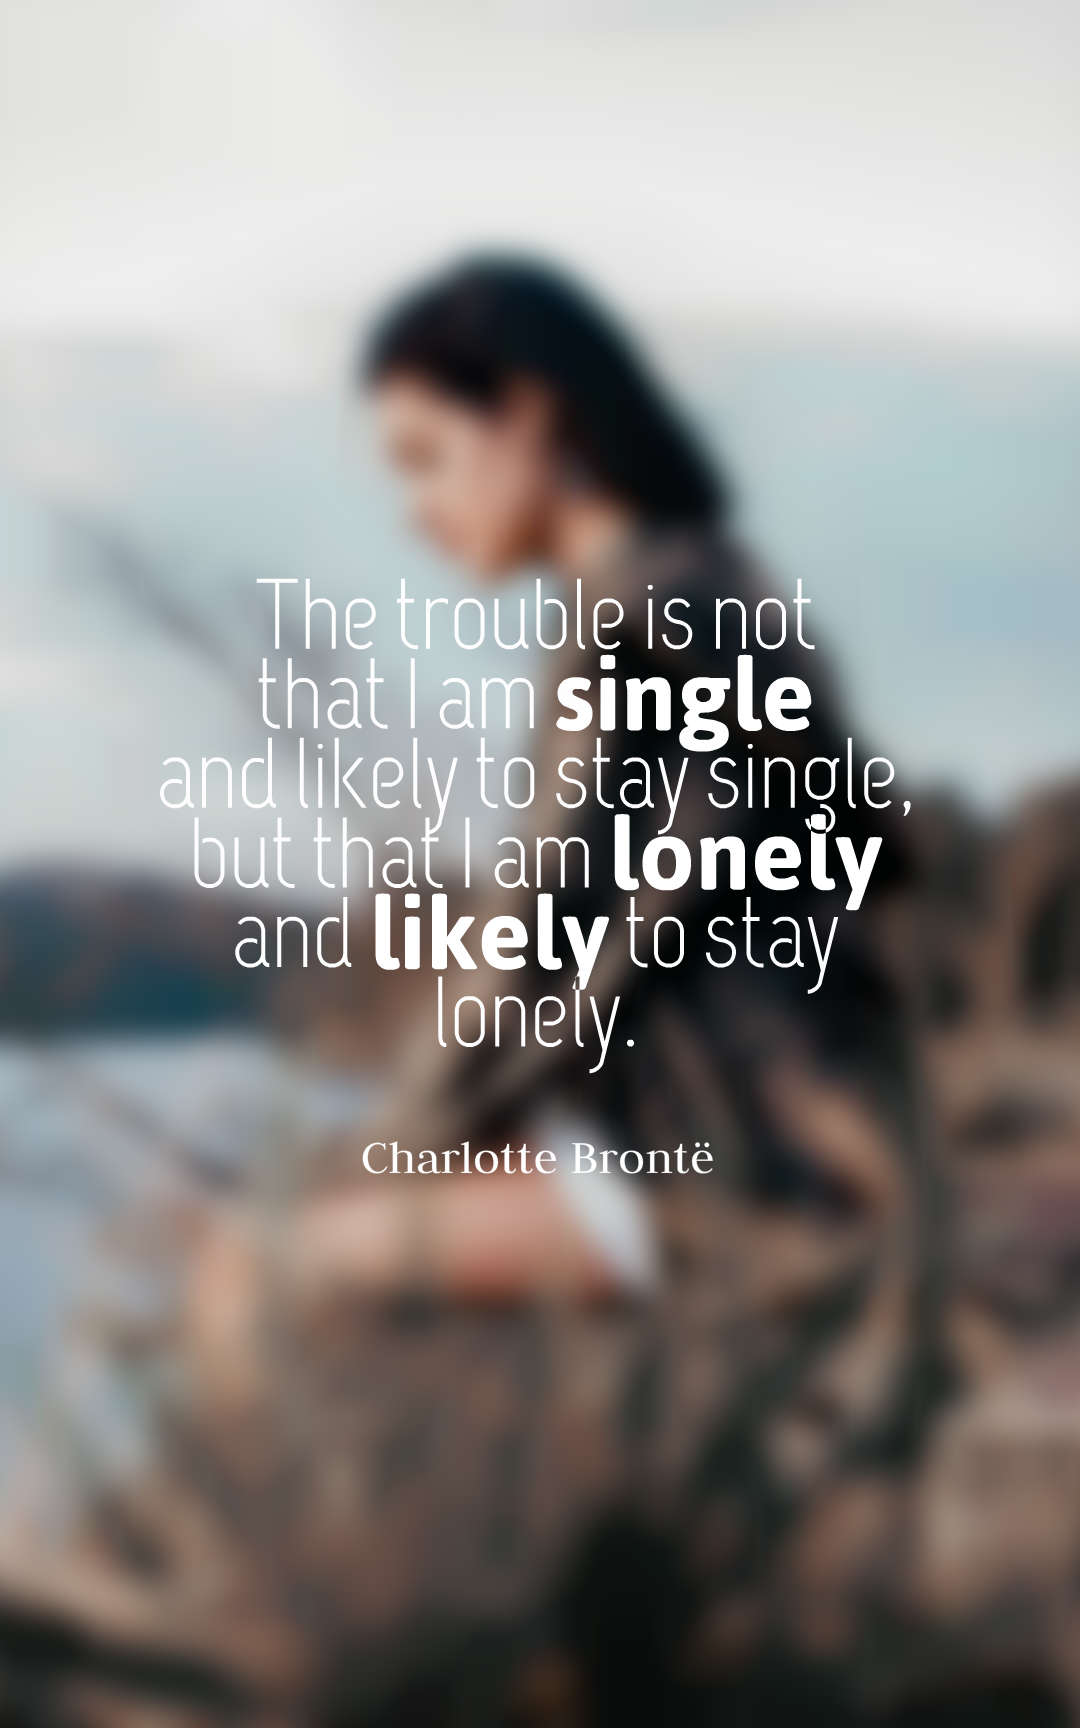 The trouble is not that I am single and likely to stay single but that I am lonely and likely to stay lonely.